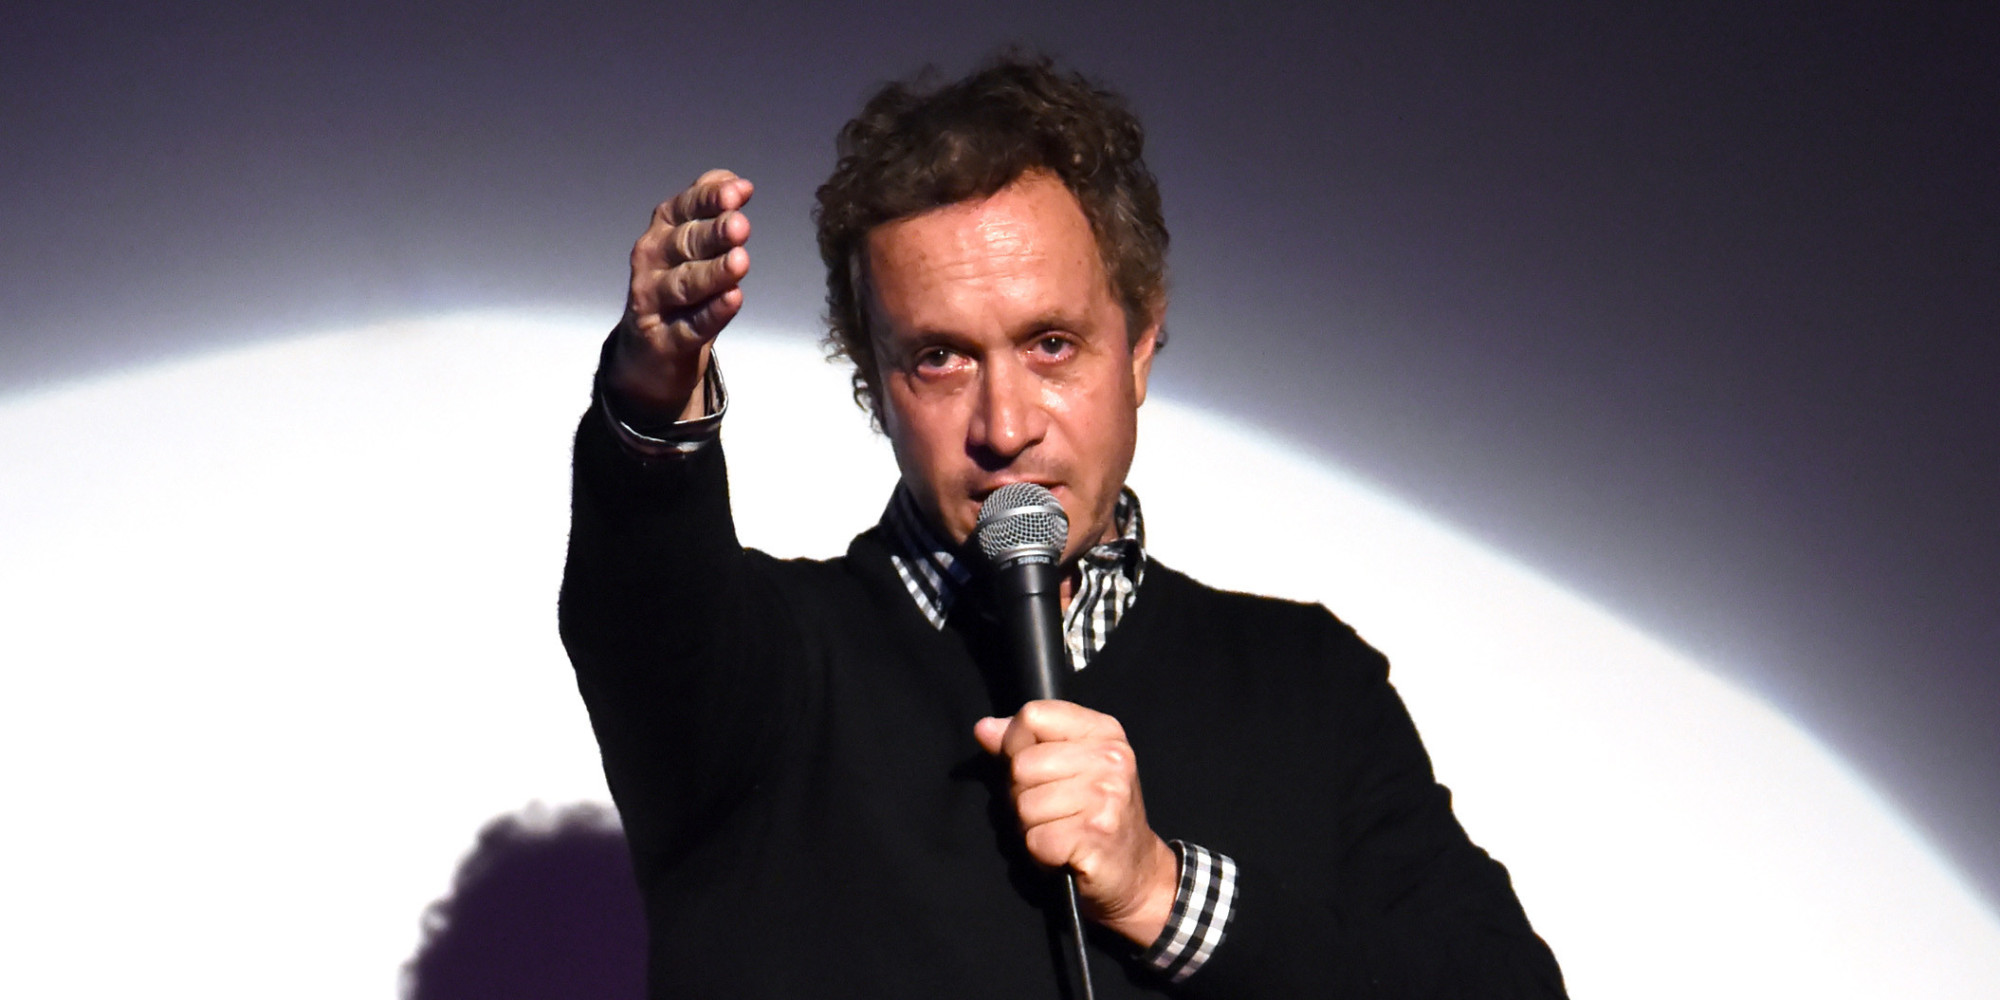 More Pictures Of Pauly Shore. 